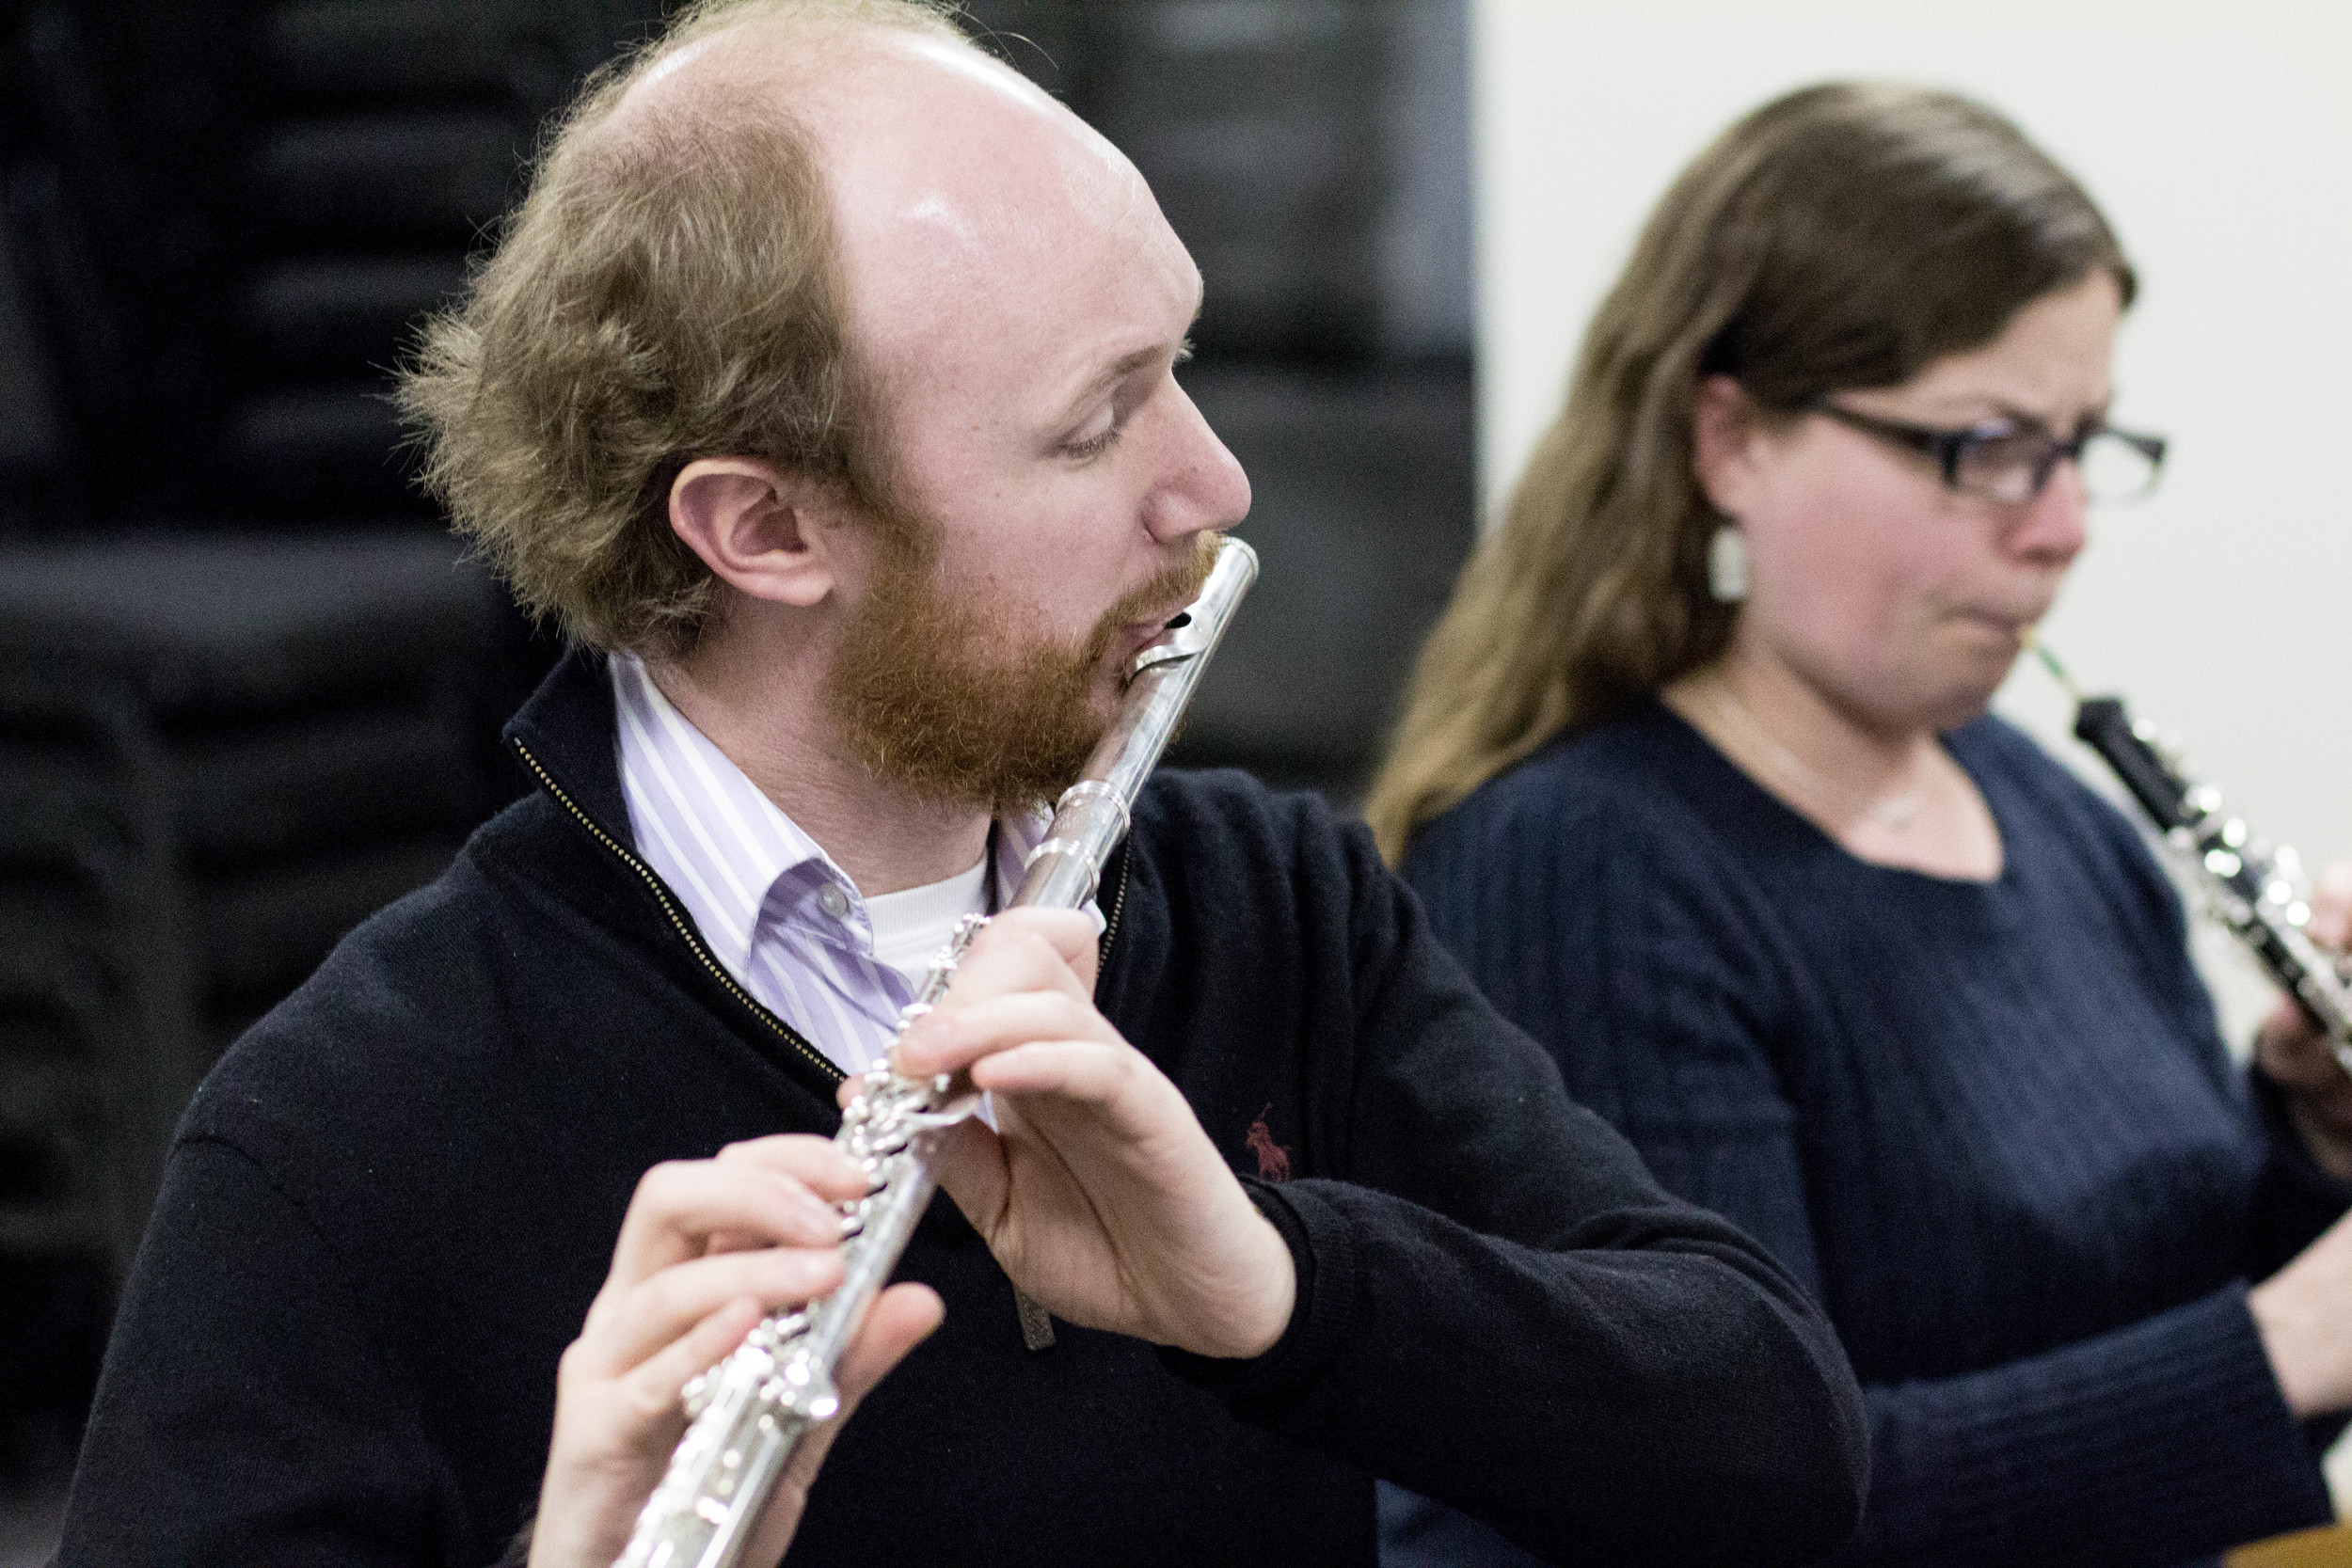 Copy of Tim Crouch (flute) and Liz Eccleston (oboe)